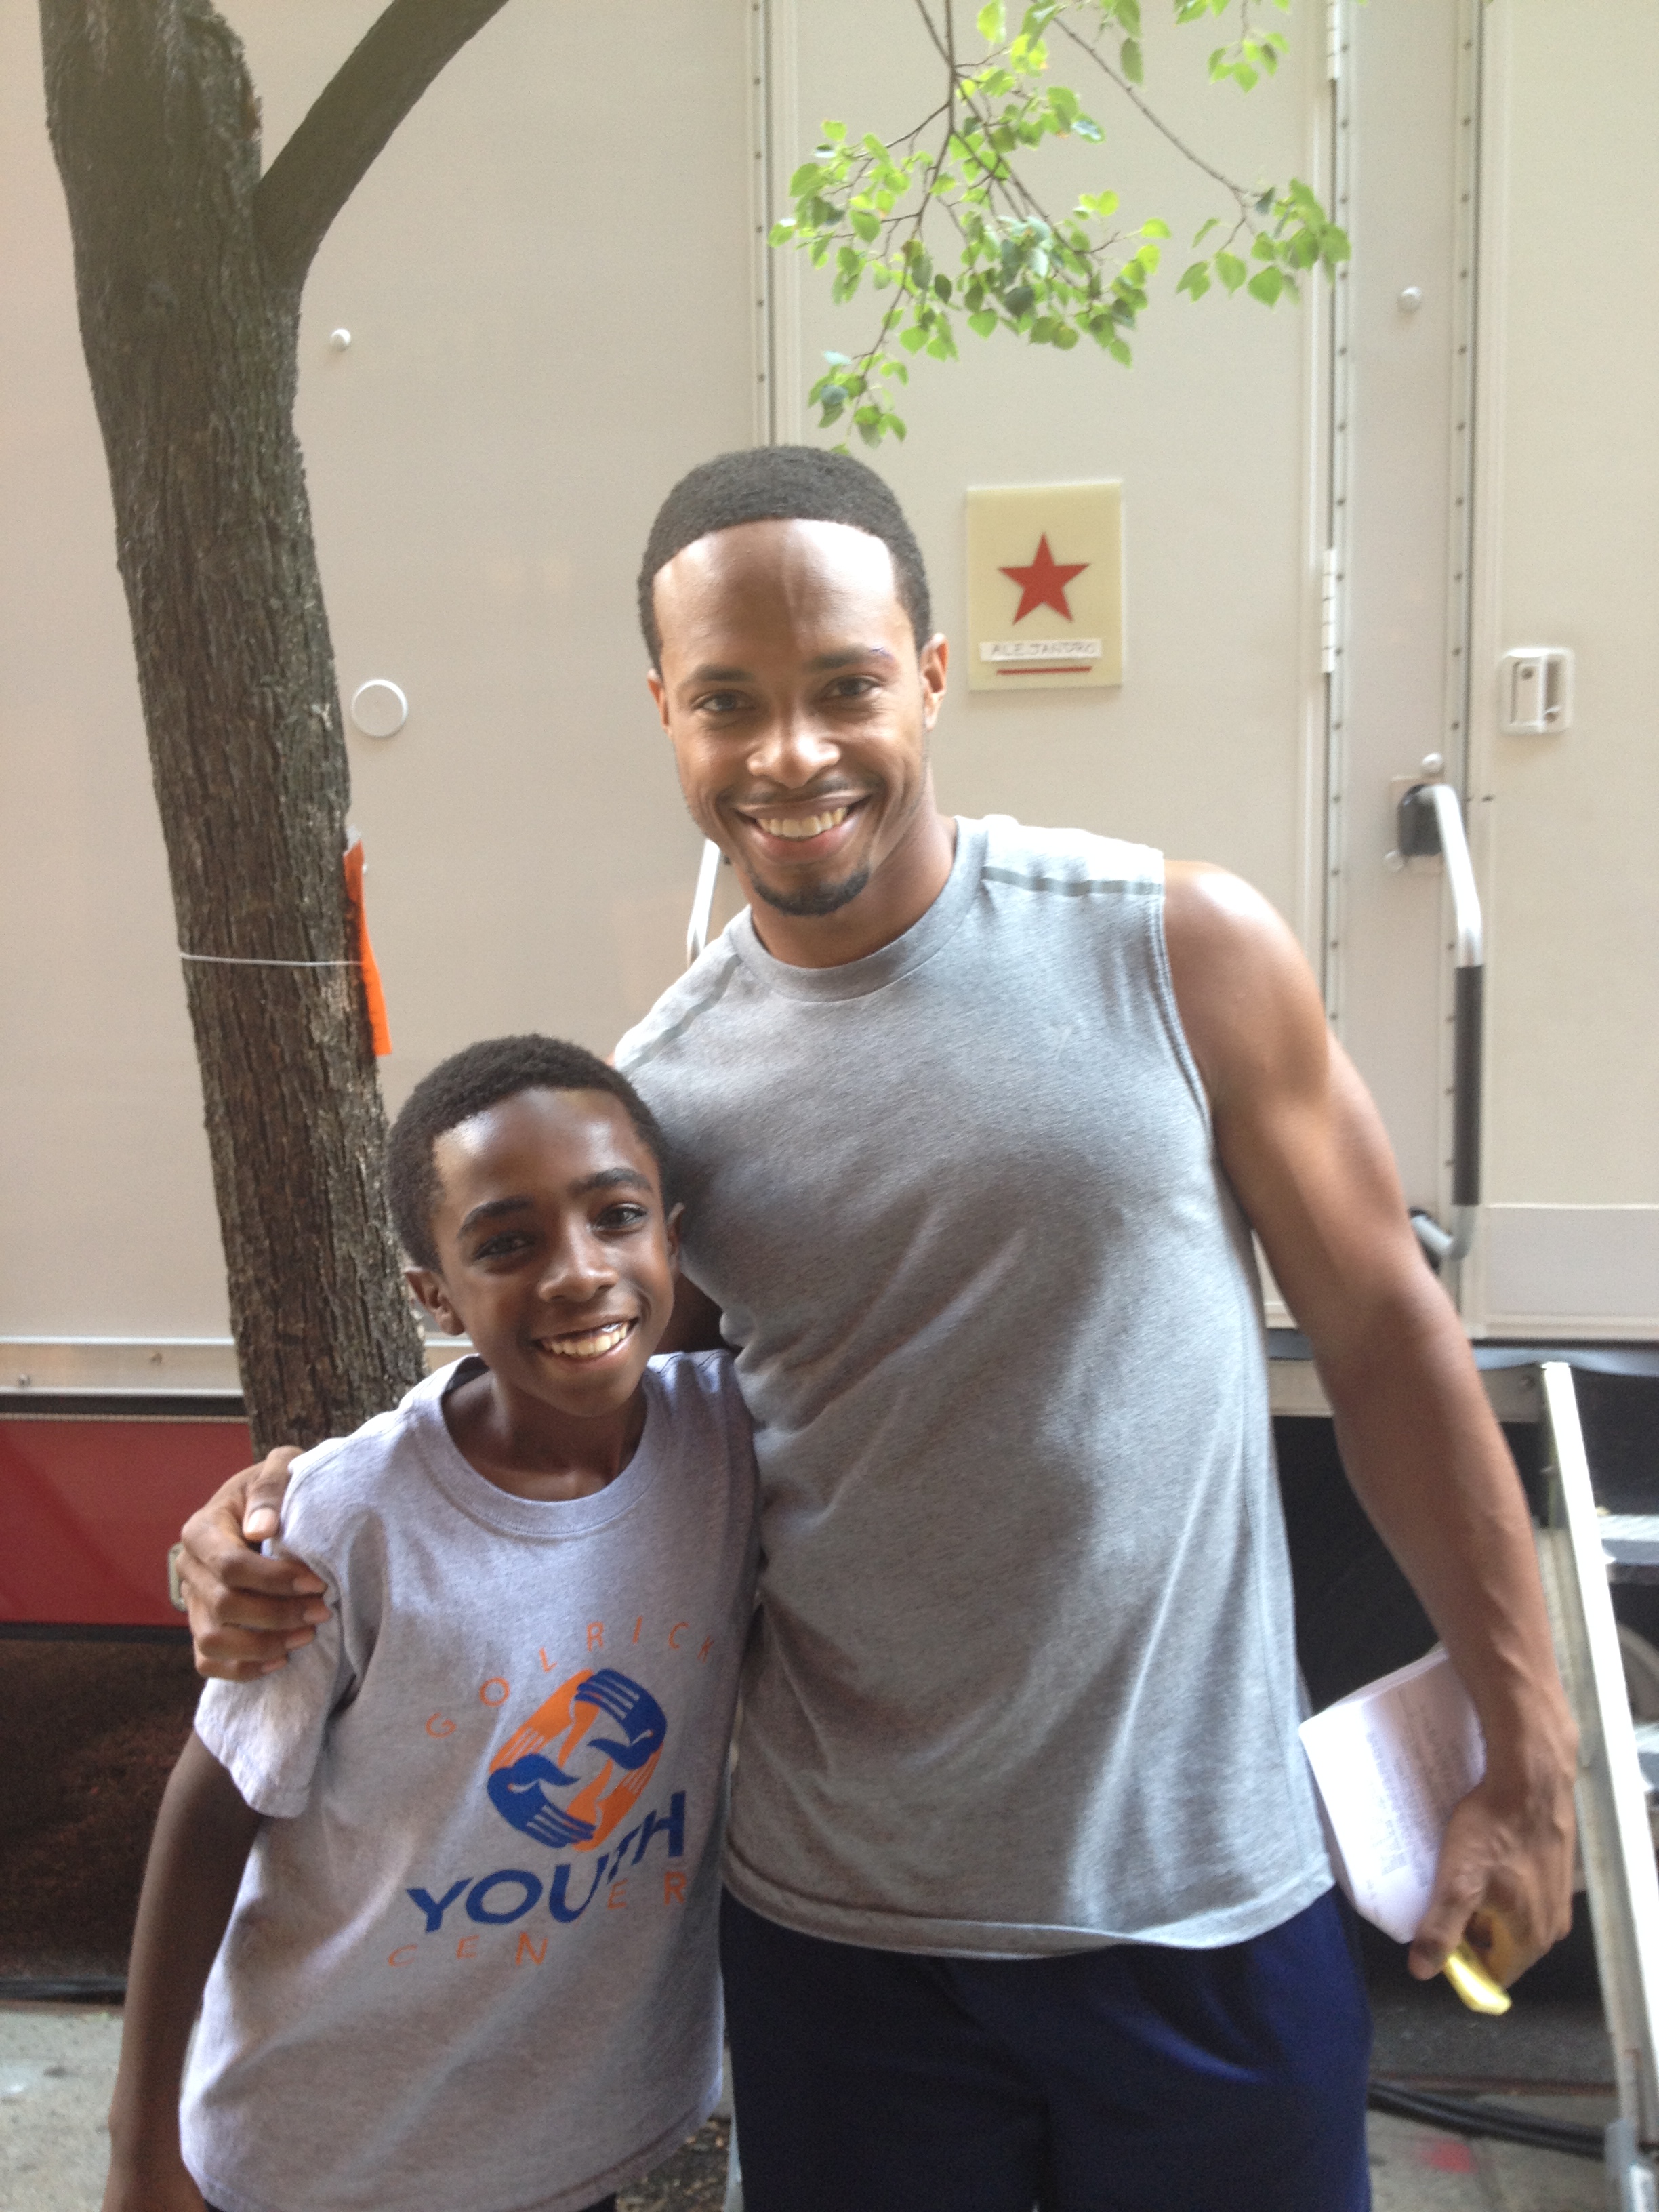 On set of Forever with actor, Cornelius Smith Jr